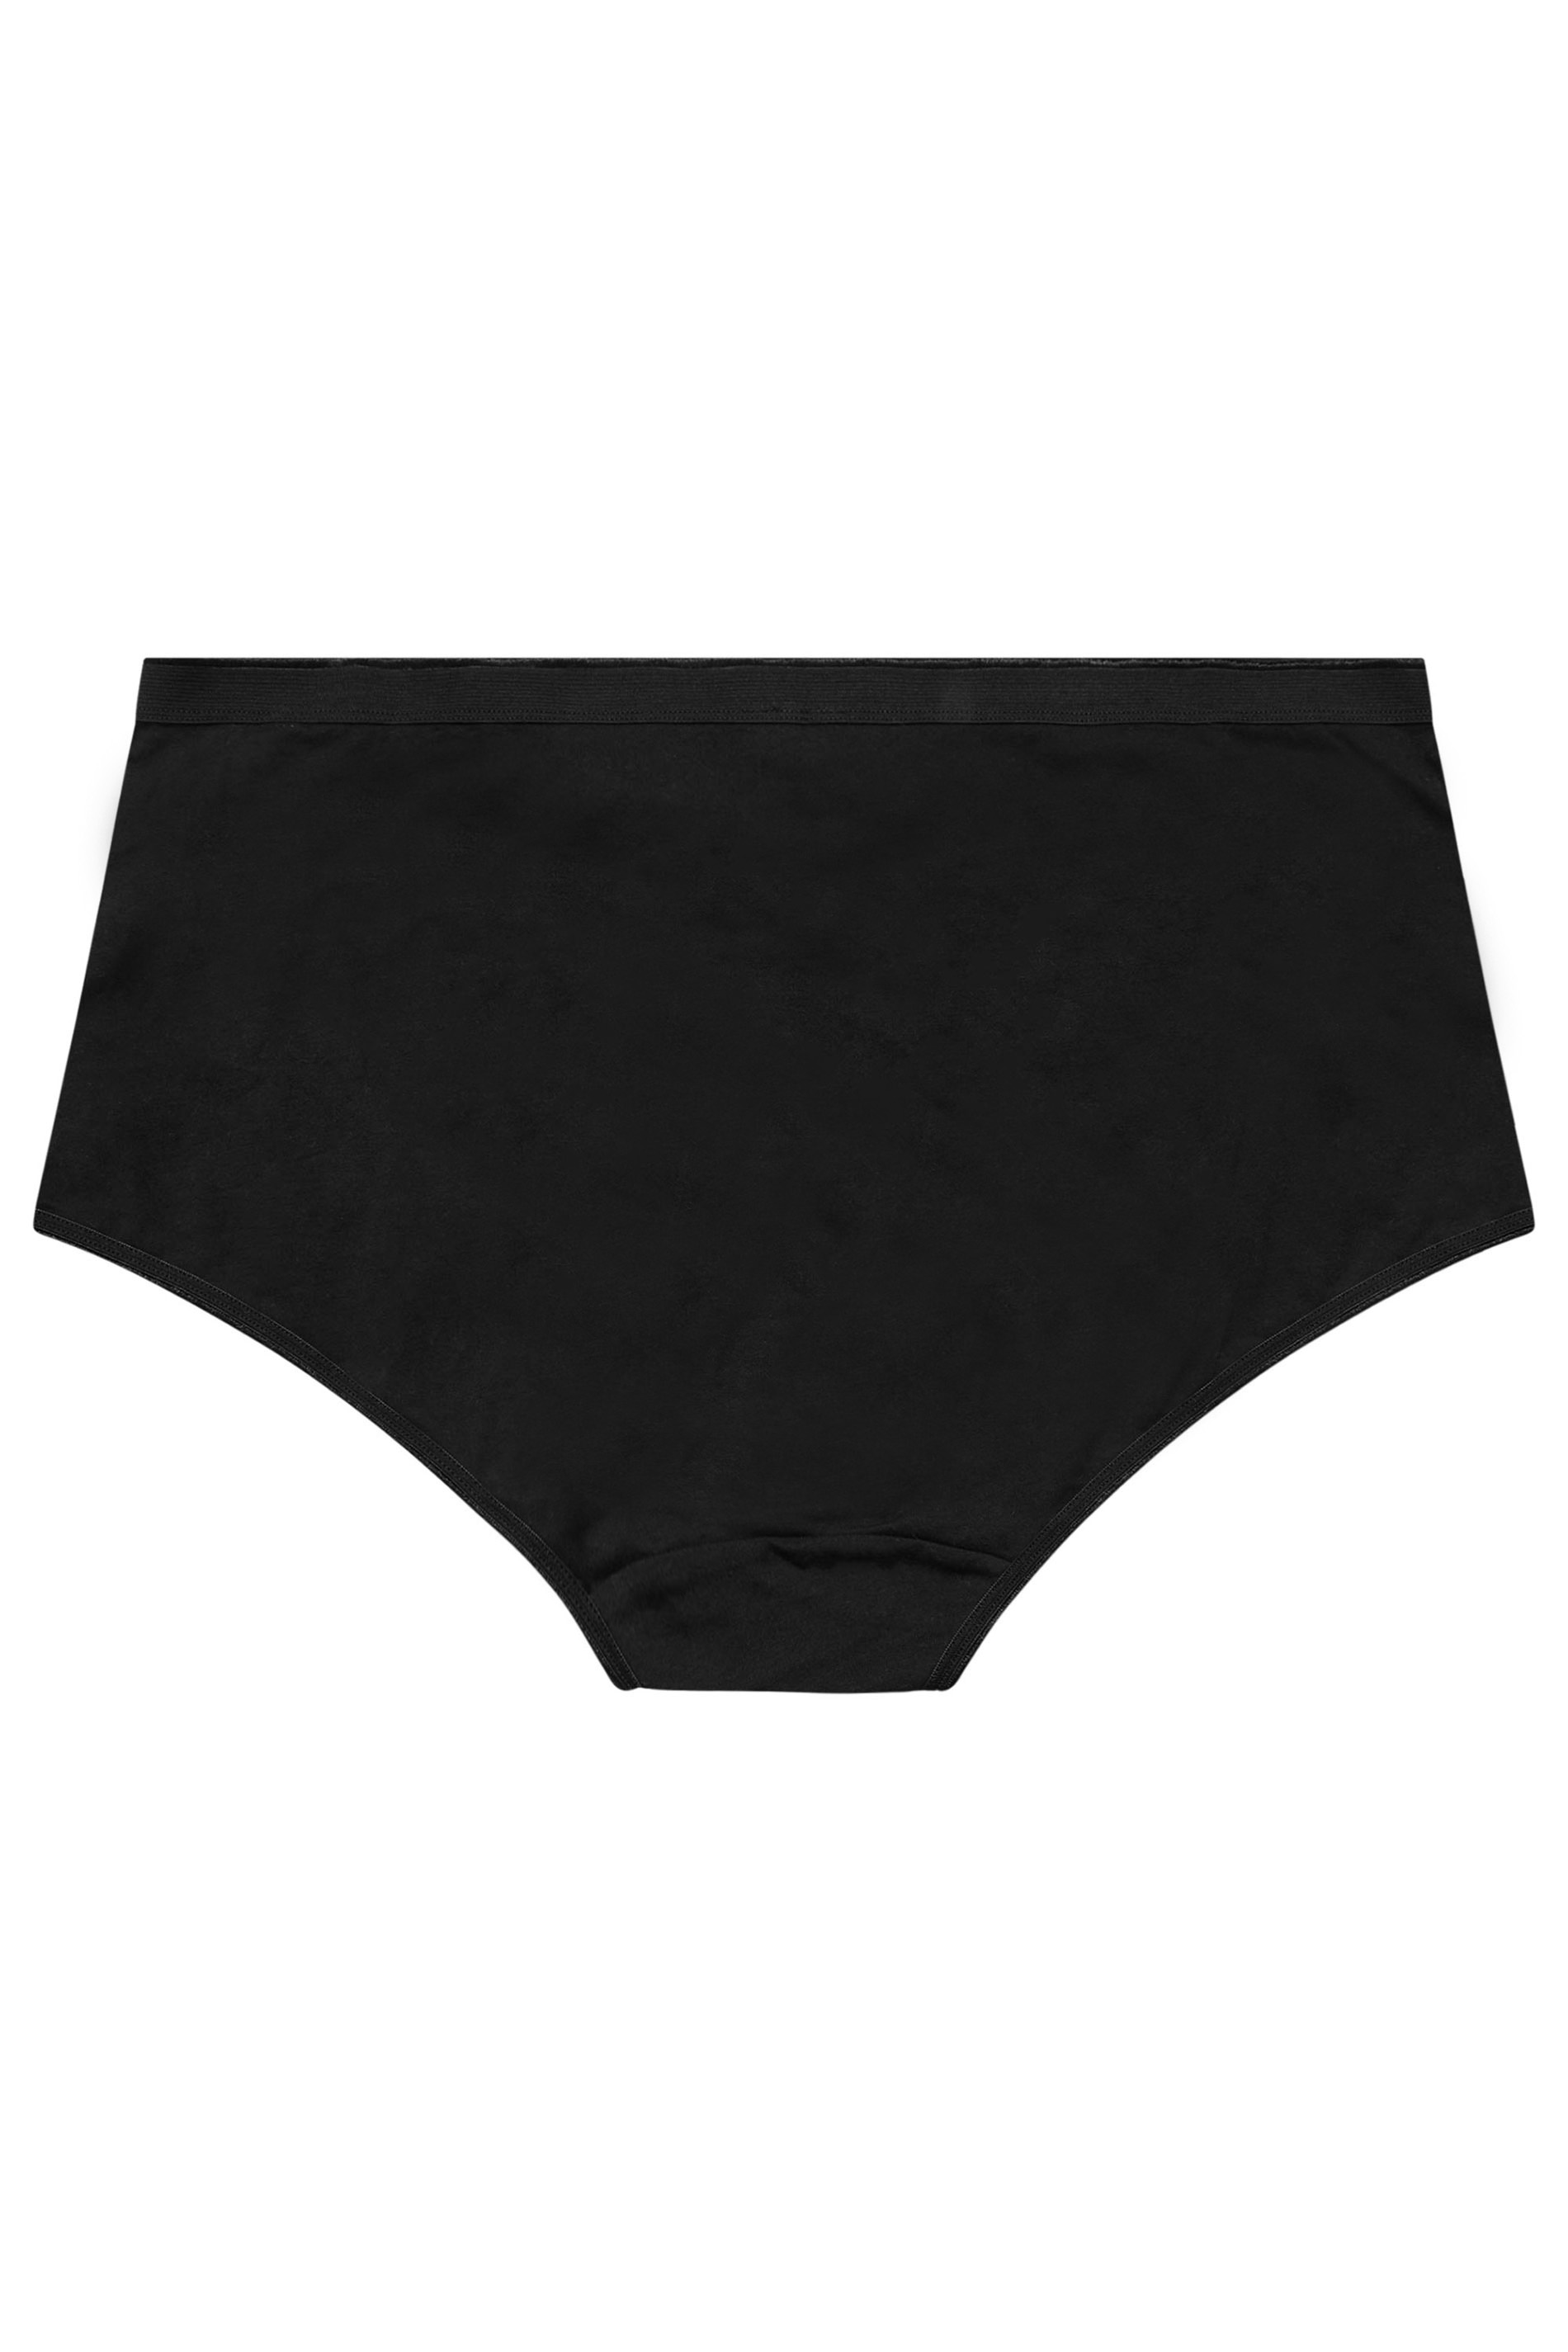 YOURS 4 PACK Plus Size Black Cotton Stretch Full Briefs | Yours Clothing